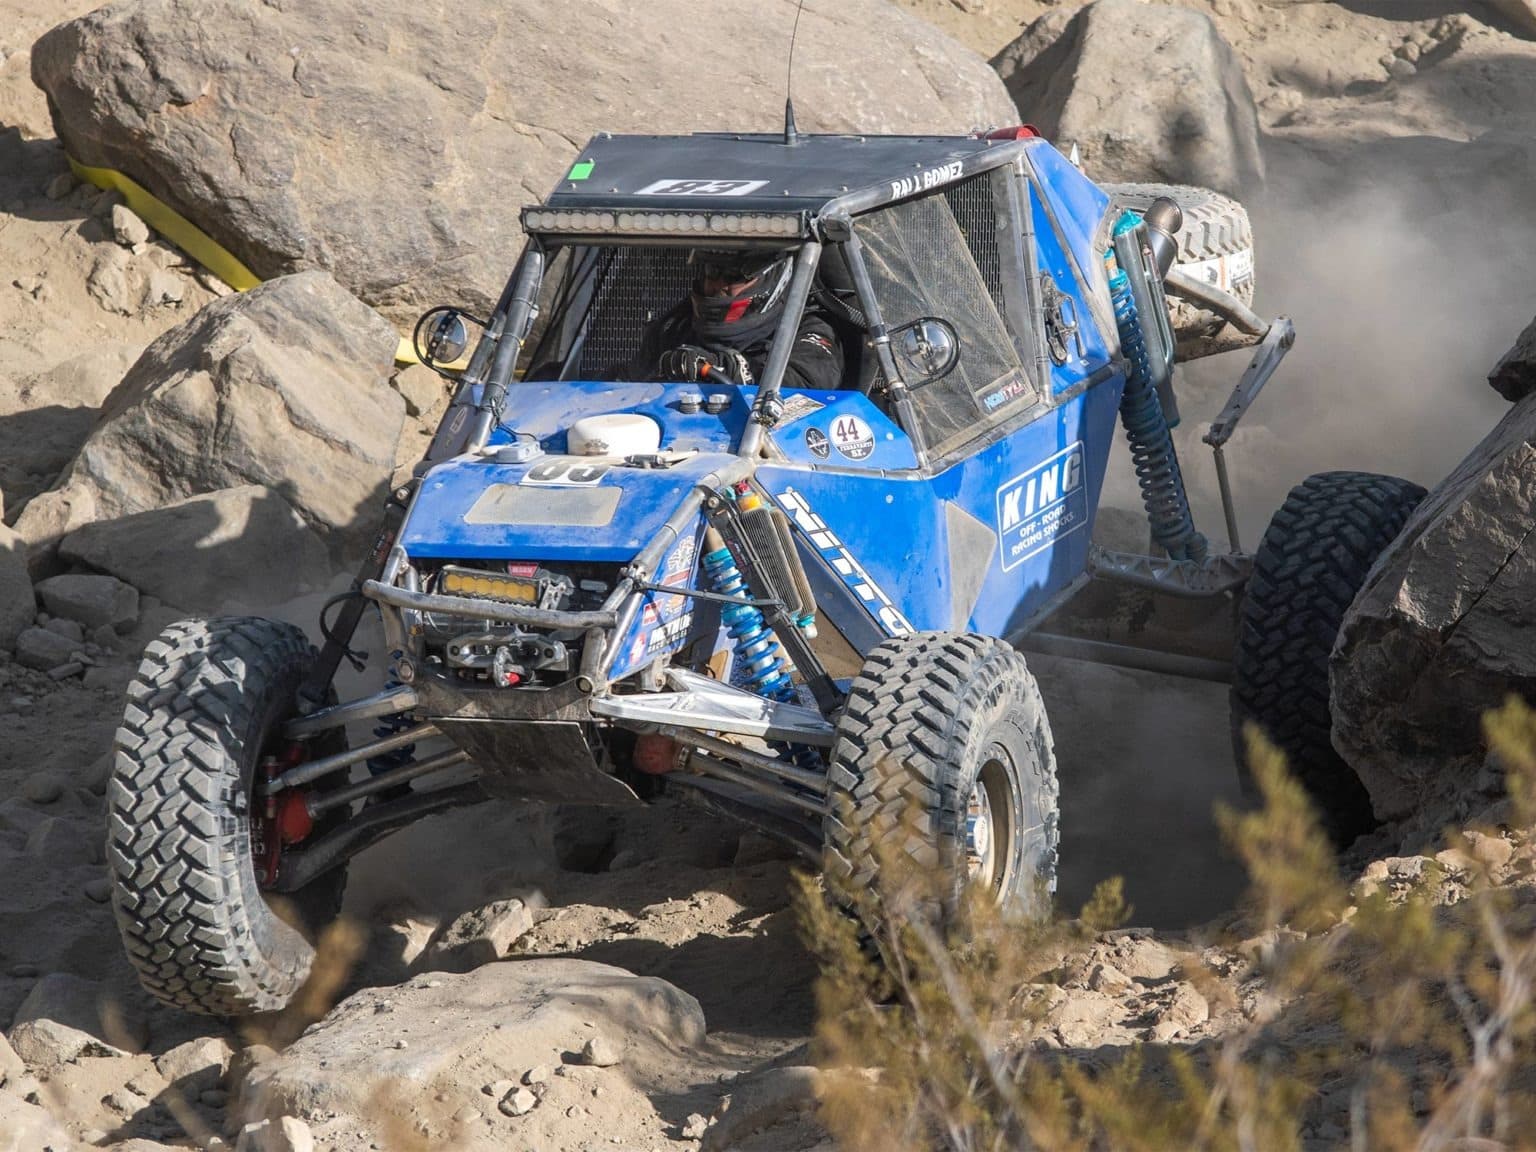 A blue off-road vehicle traversing over rocky, difficult terrain.